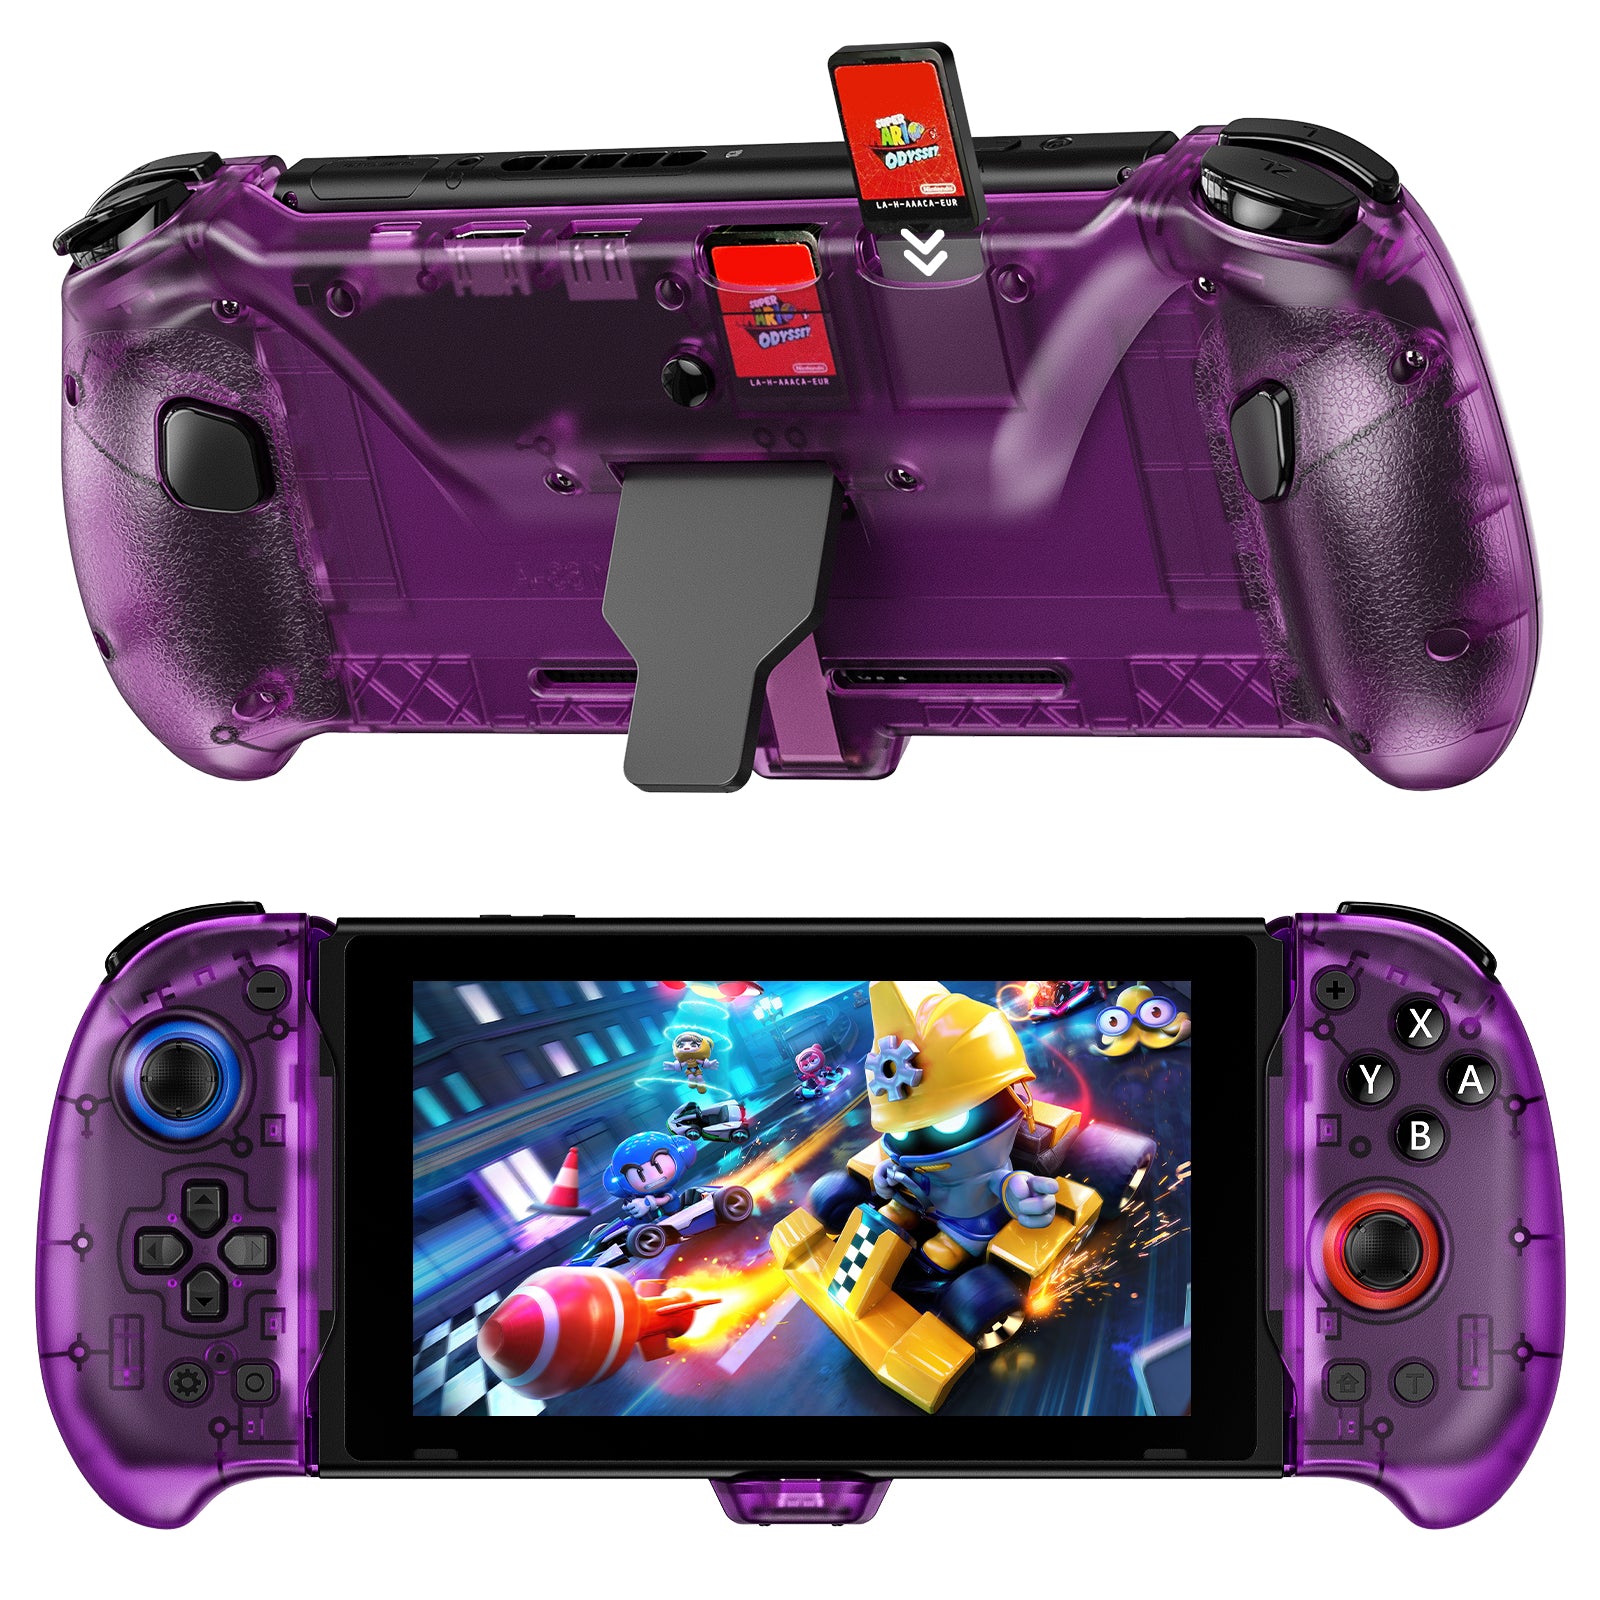 Purple Switch GripCon controller with built-in HDMI port.